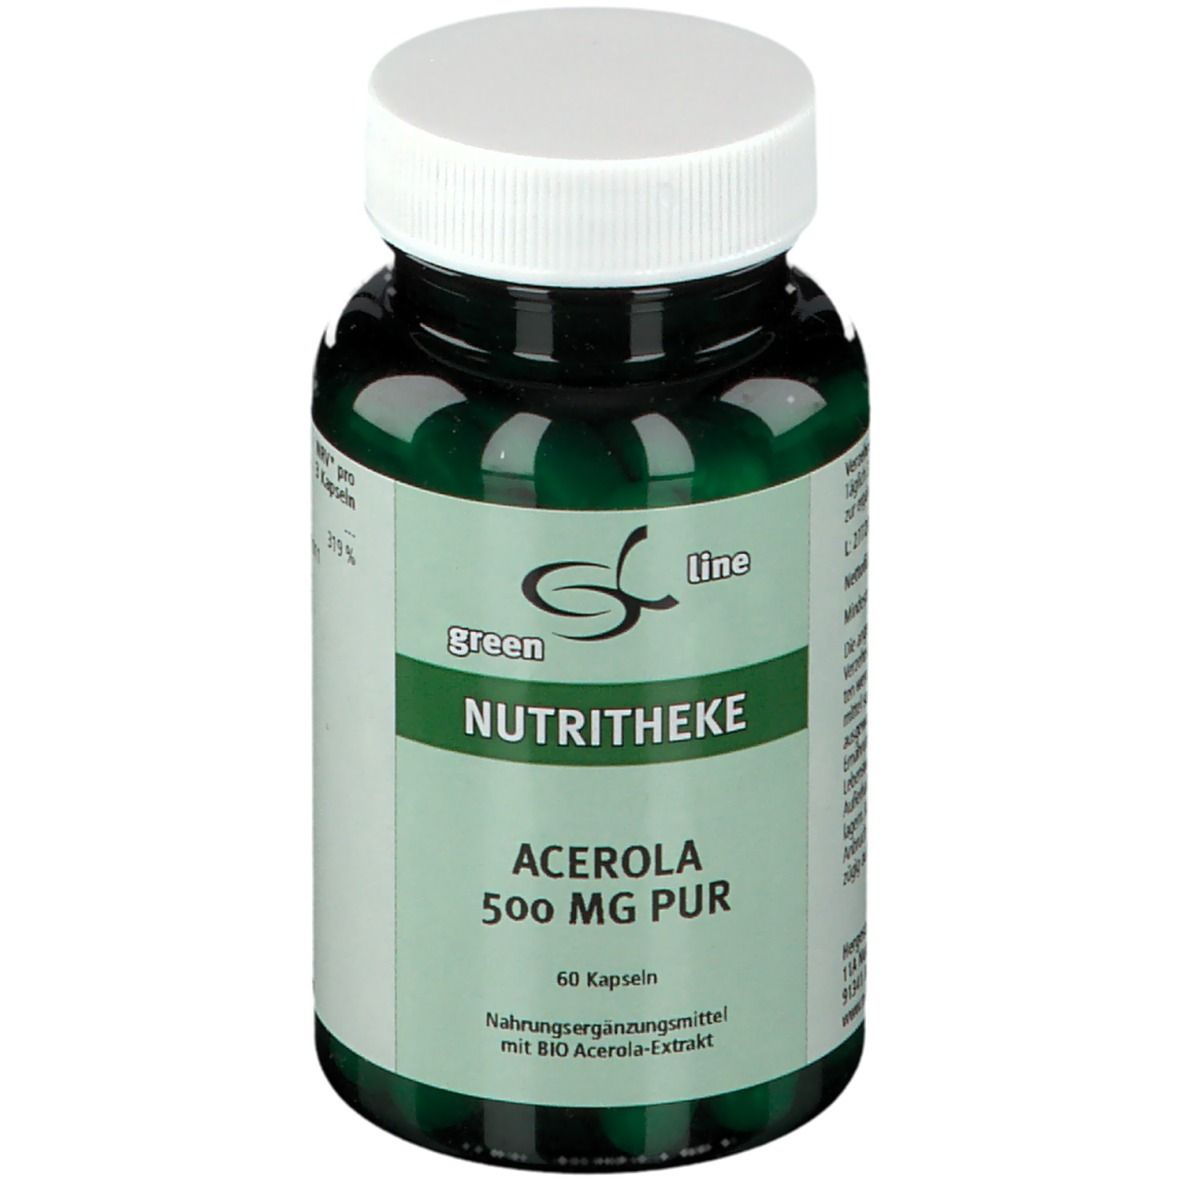 Image of green line Acerola 500 mg Pur